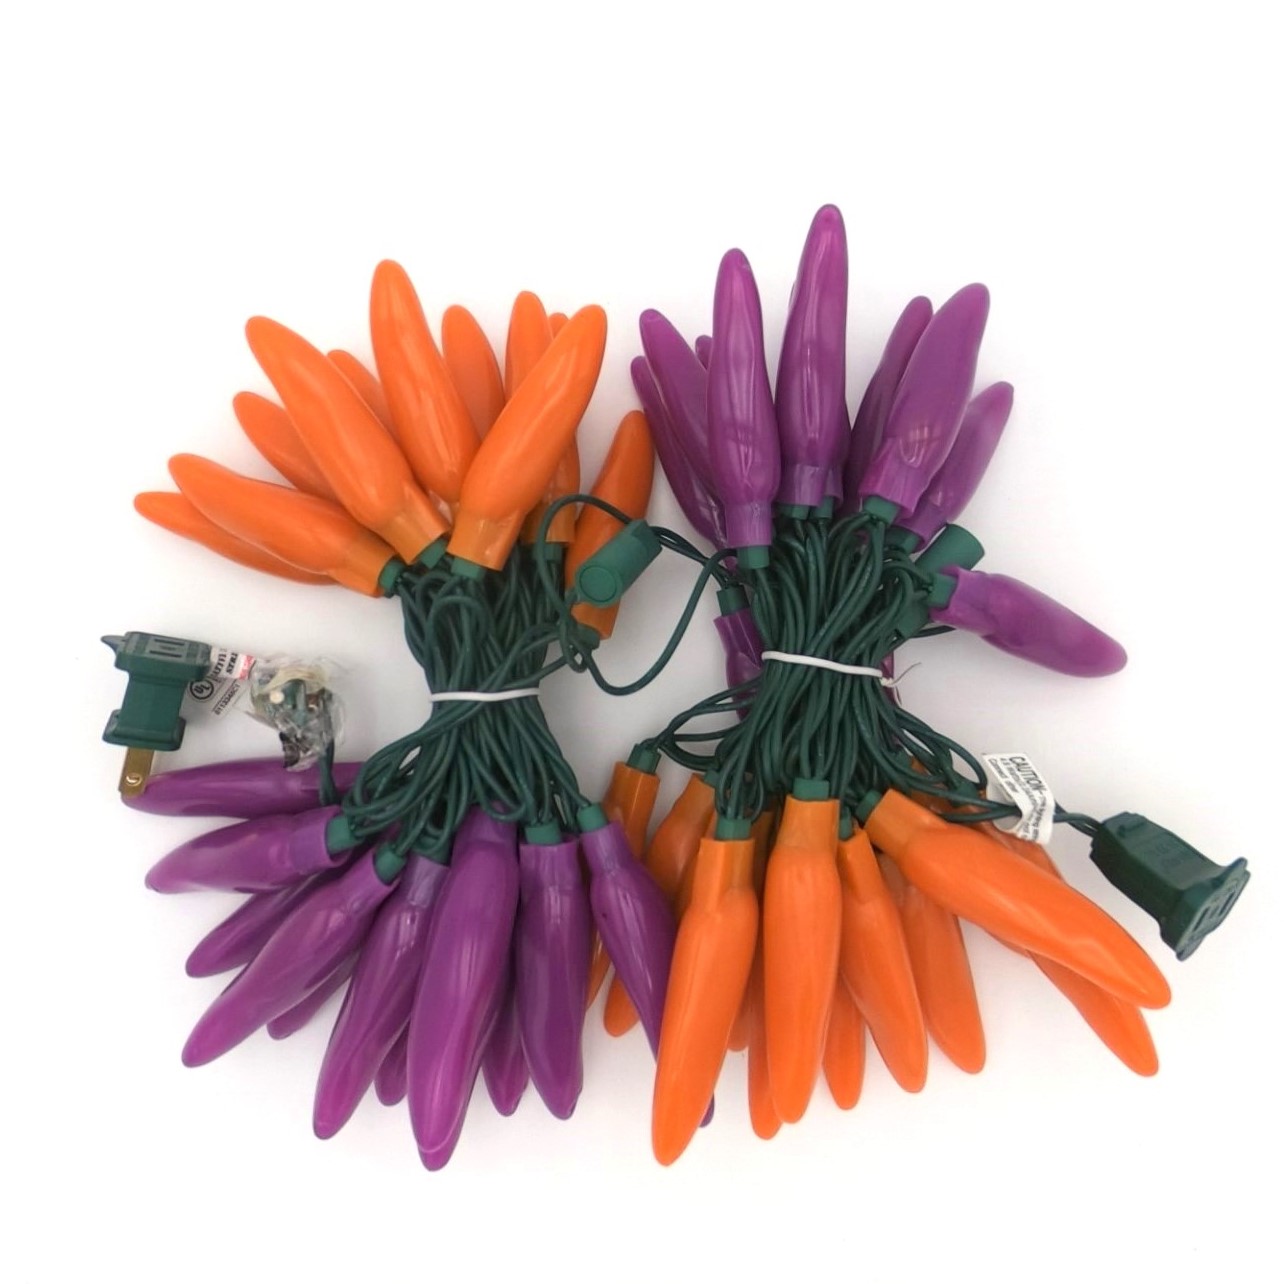 C18350 50 LED Halloween Chili Pepper Lights bunched by RC Company LLC